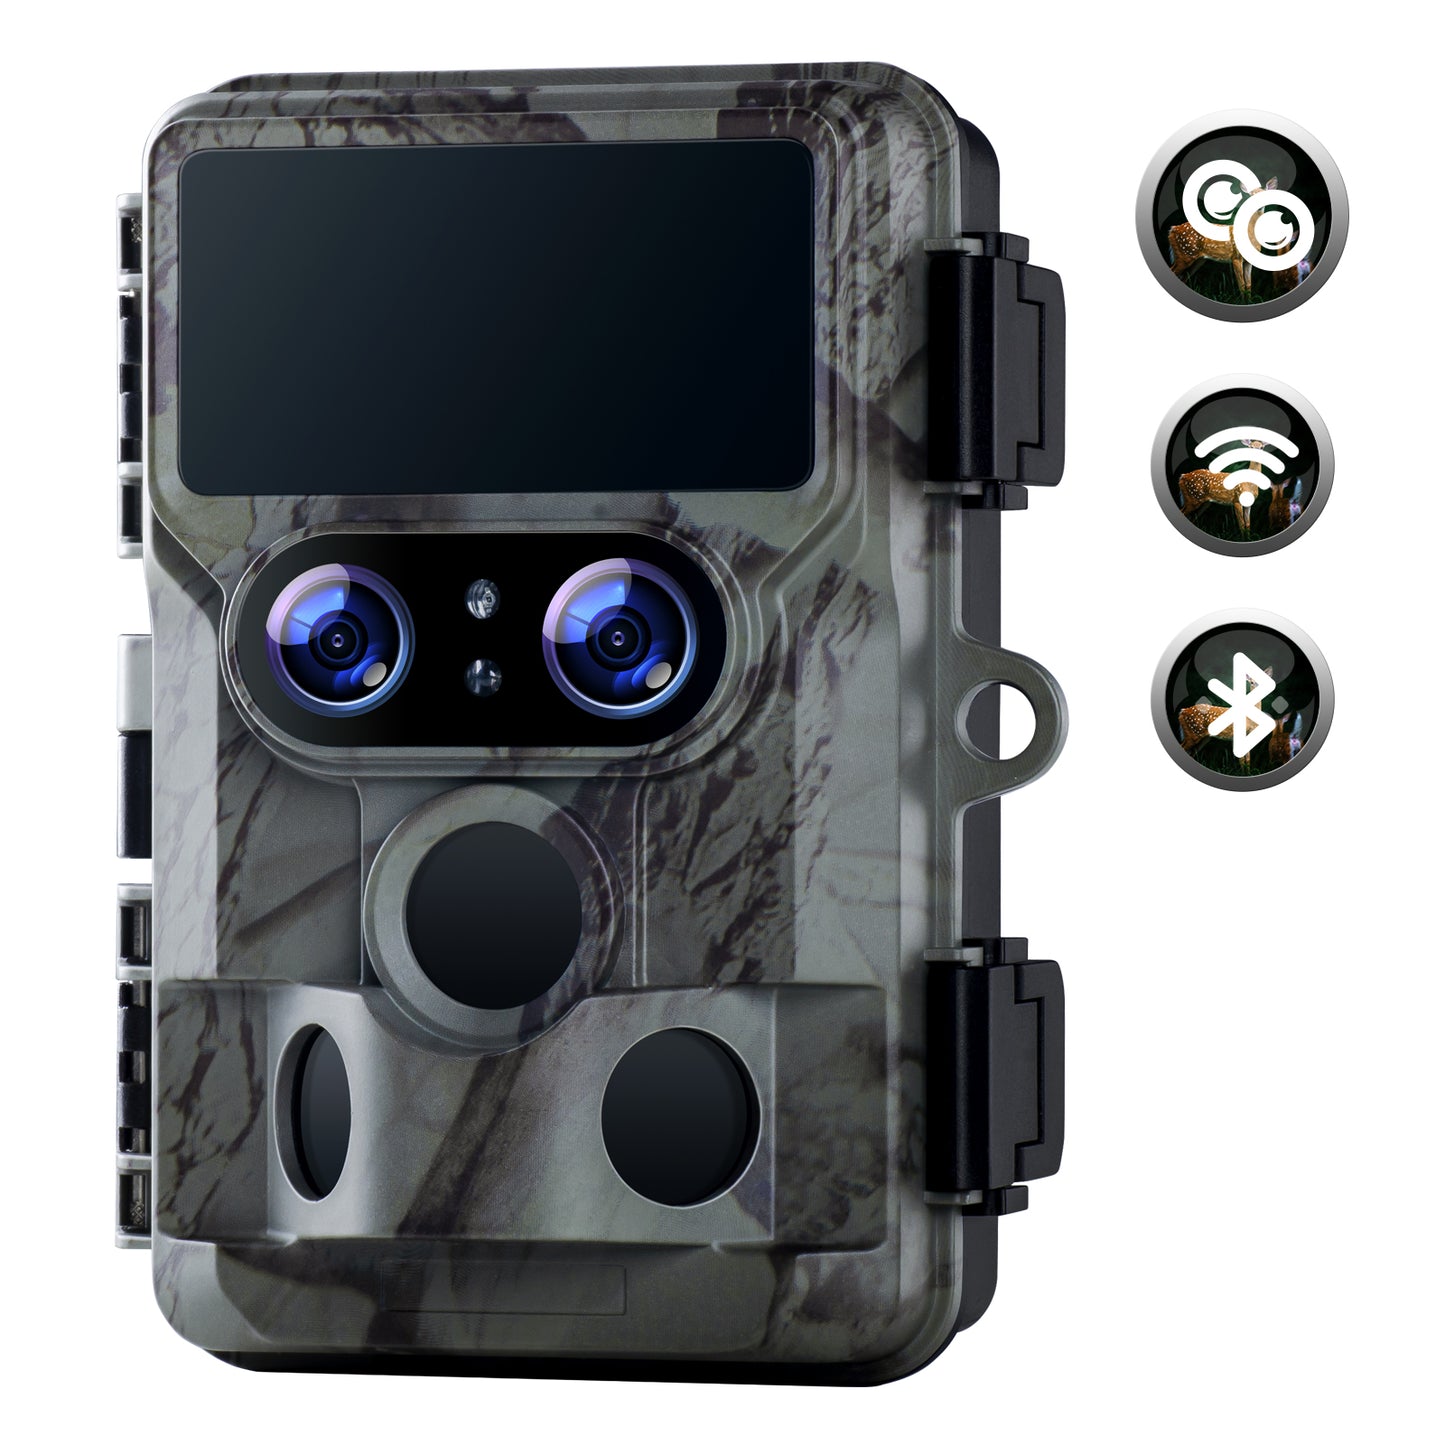 TOGUARD Trail Camera - Dual Lens Starlight Night Vision WiFi 4K 30FPS 60MP Hunting Game Cameras with Sony IMX458 0.1s Trigger Sensors H.265 MP4 Video IP66 Waterproof Trail Cam for Wildlife Monitoring